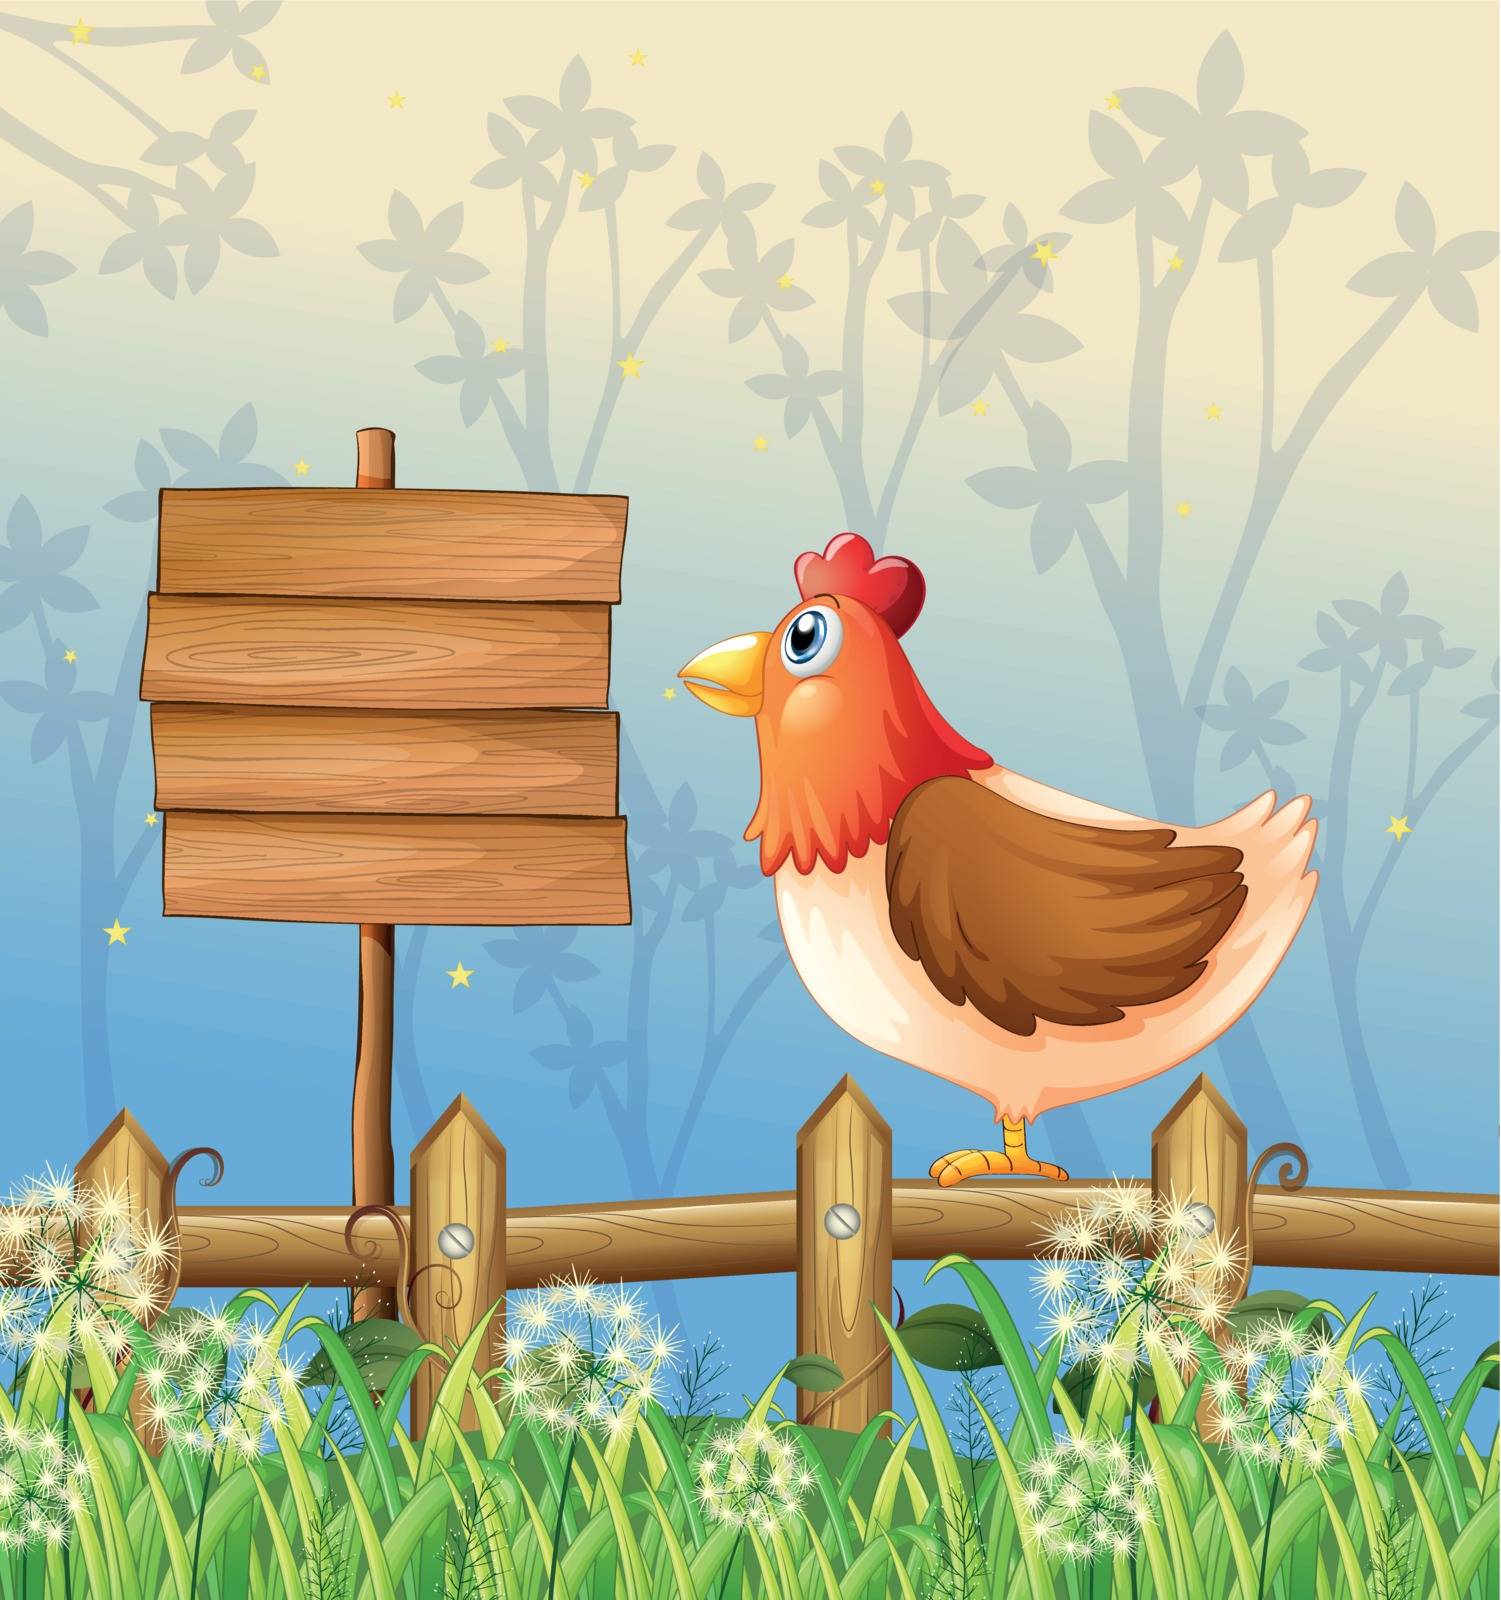 Illustration of a hen above a wooden fence facing a wooden signboard